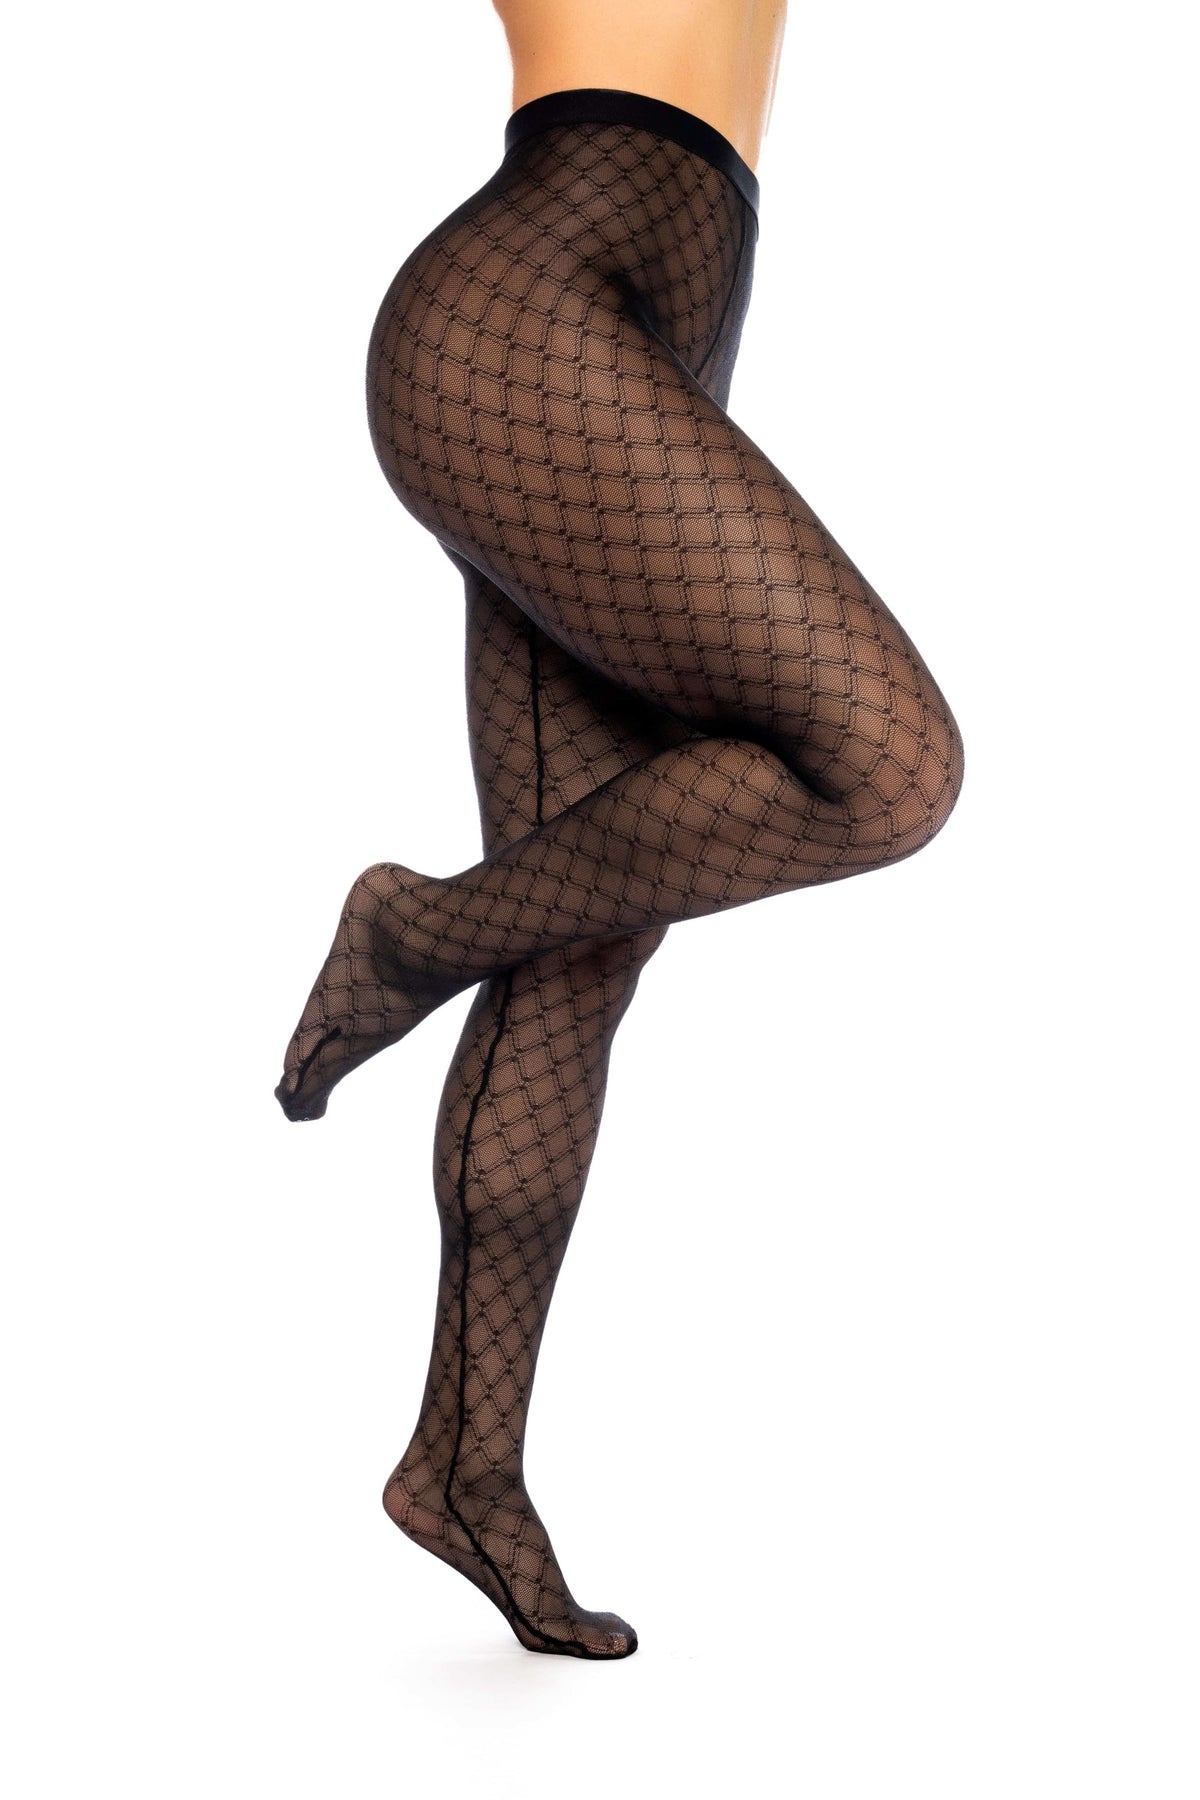 mapale Black Diamond Mesh w/ Waist Band Pantyhose Stockings 2023 Black Red White Mesh Thigh Highs Stockings Apparel &amp; Accessories &gt; Clothing &gt; Pants